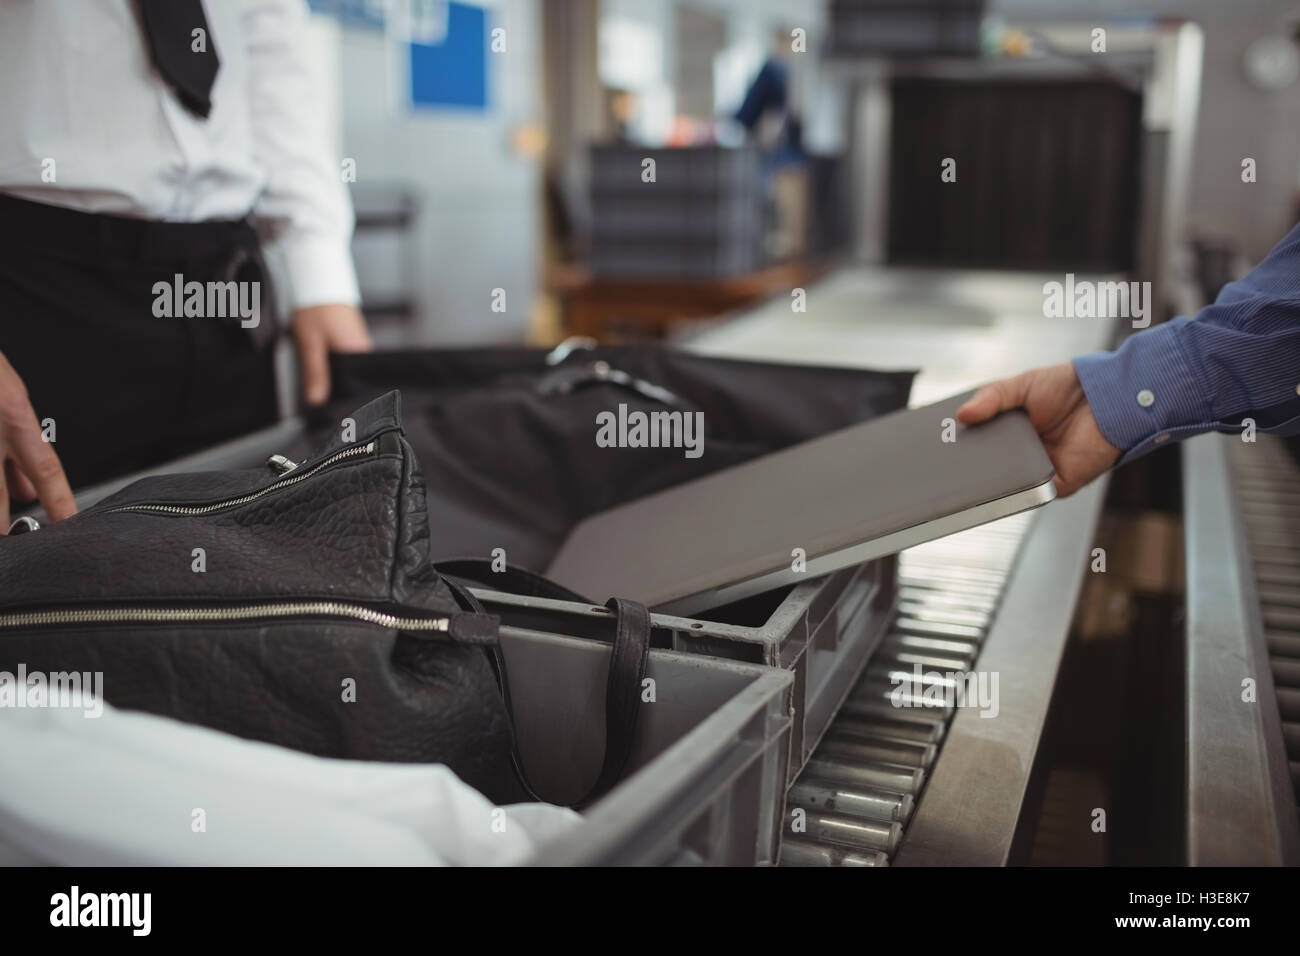 Man putting laptop into tray for security check Stock Photo